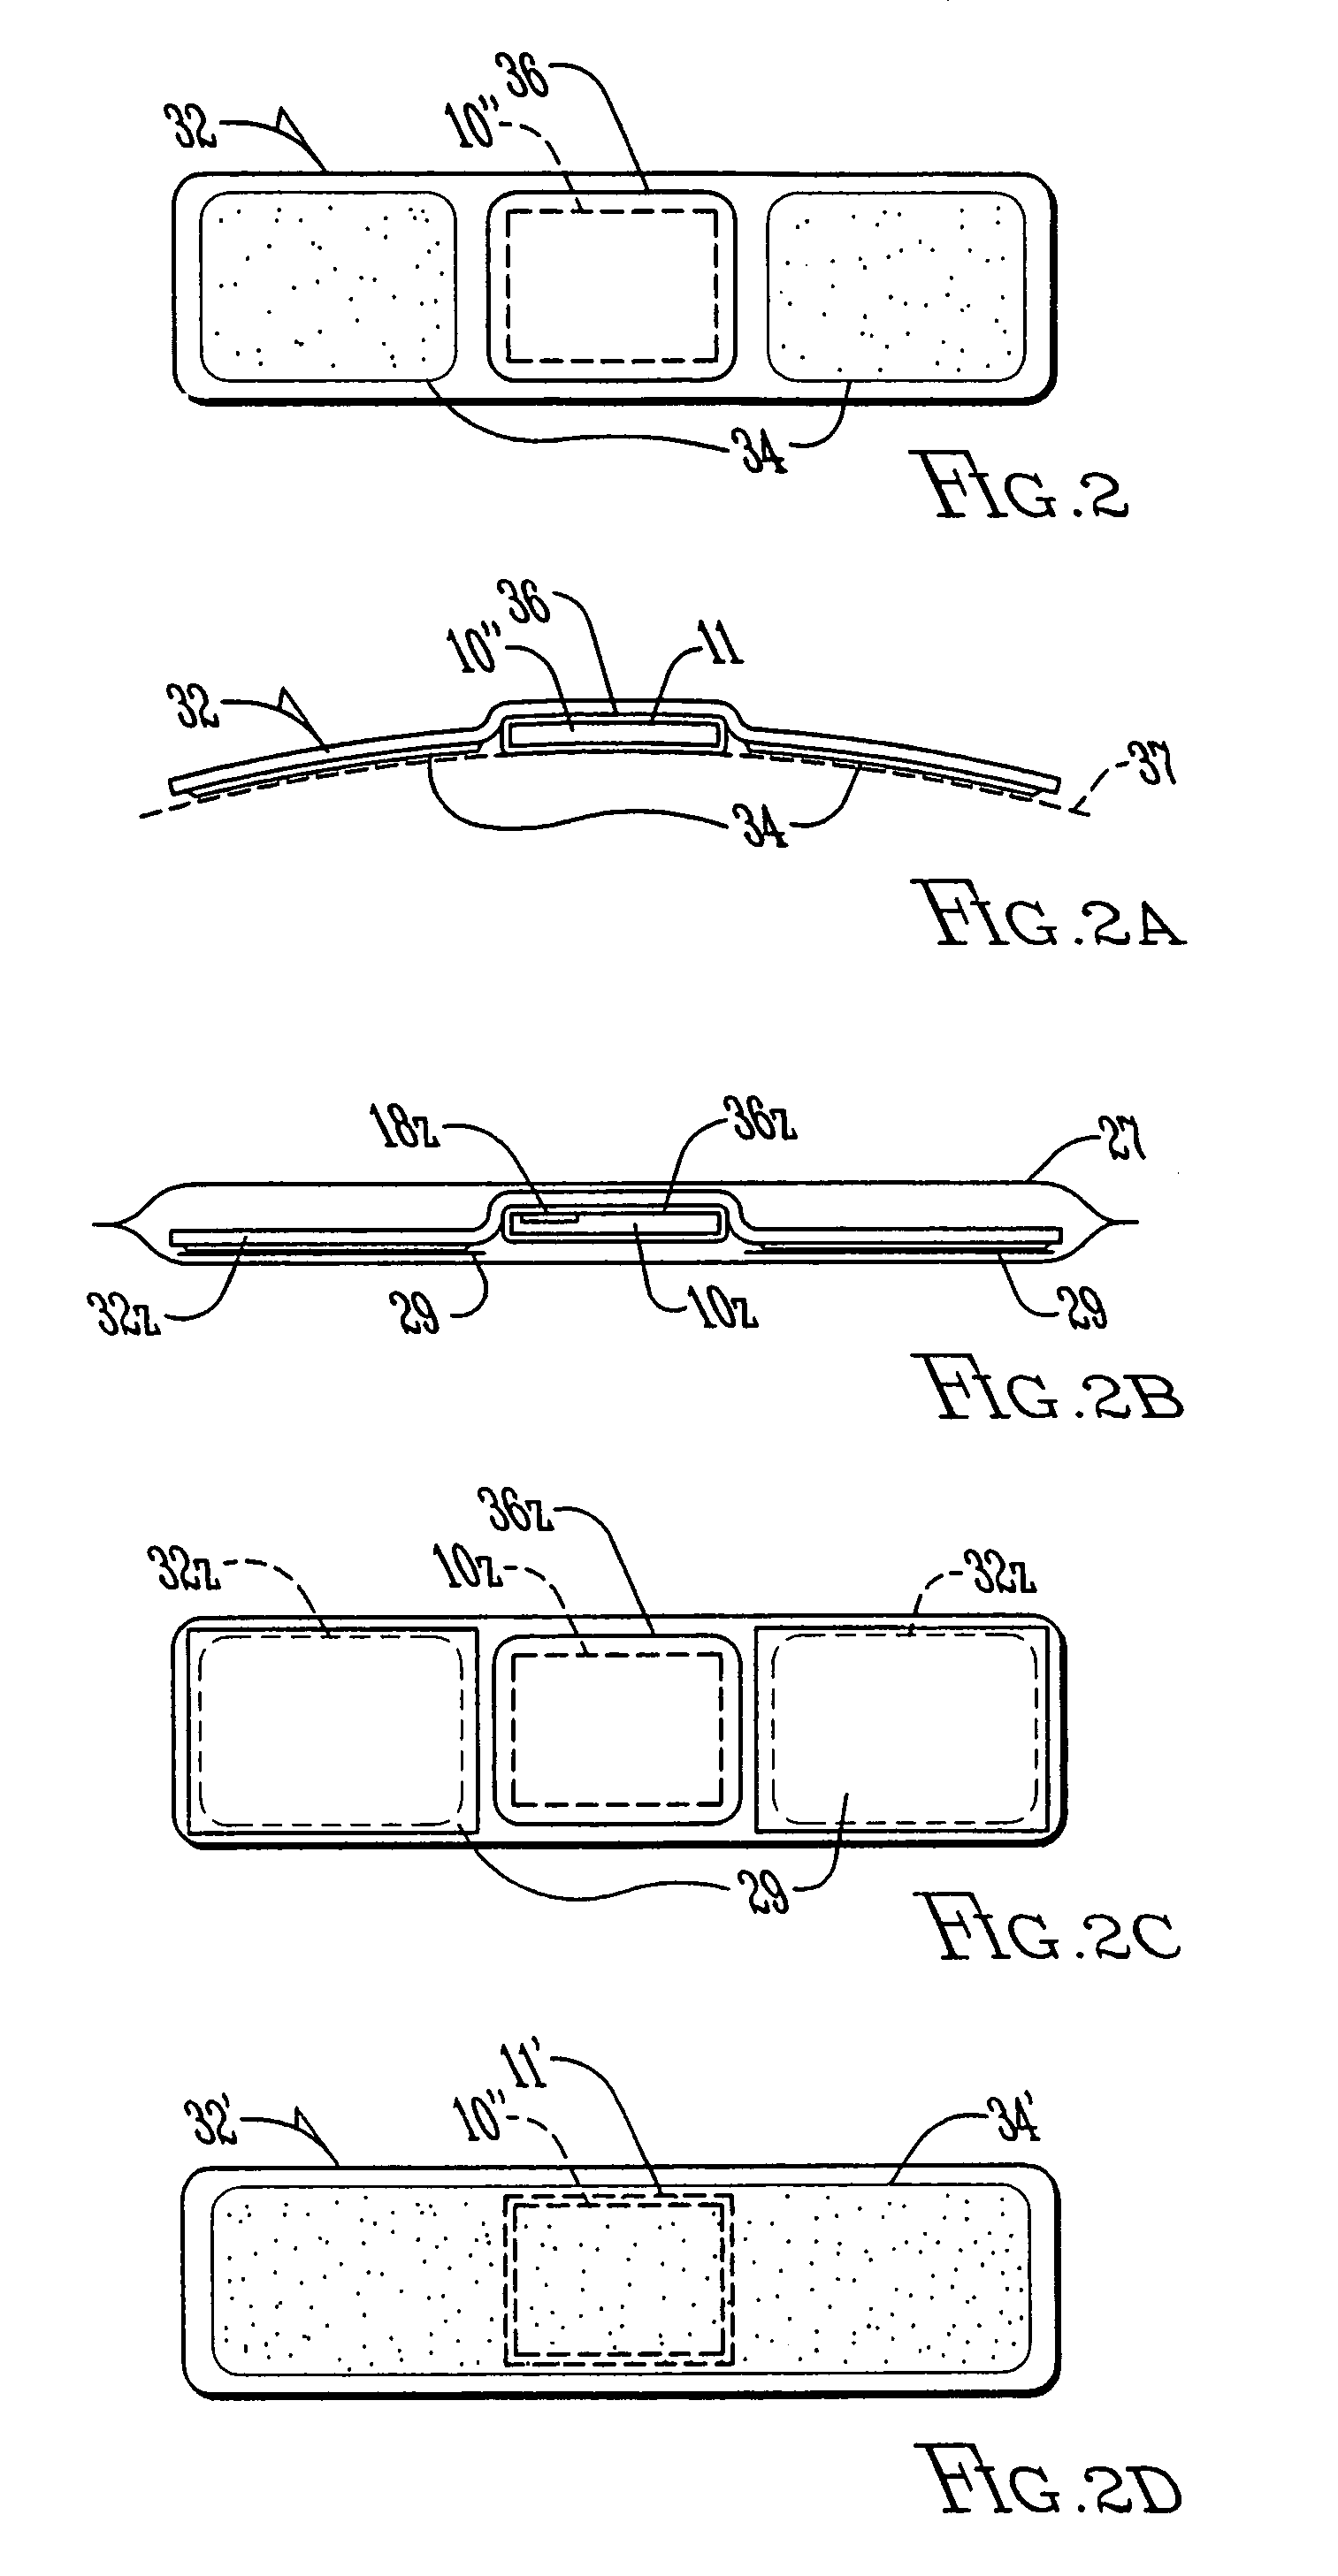 Shoes employing monitoring devices, and associated methods